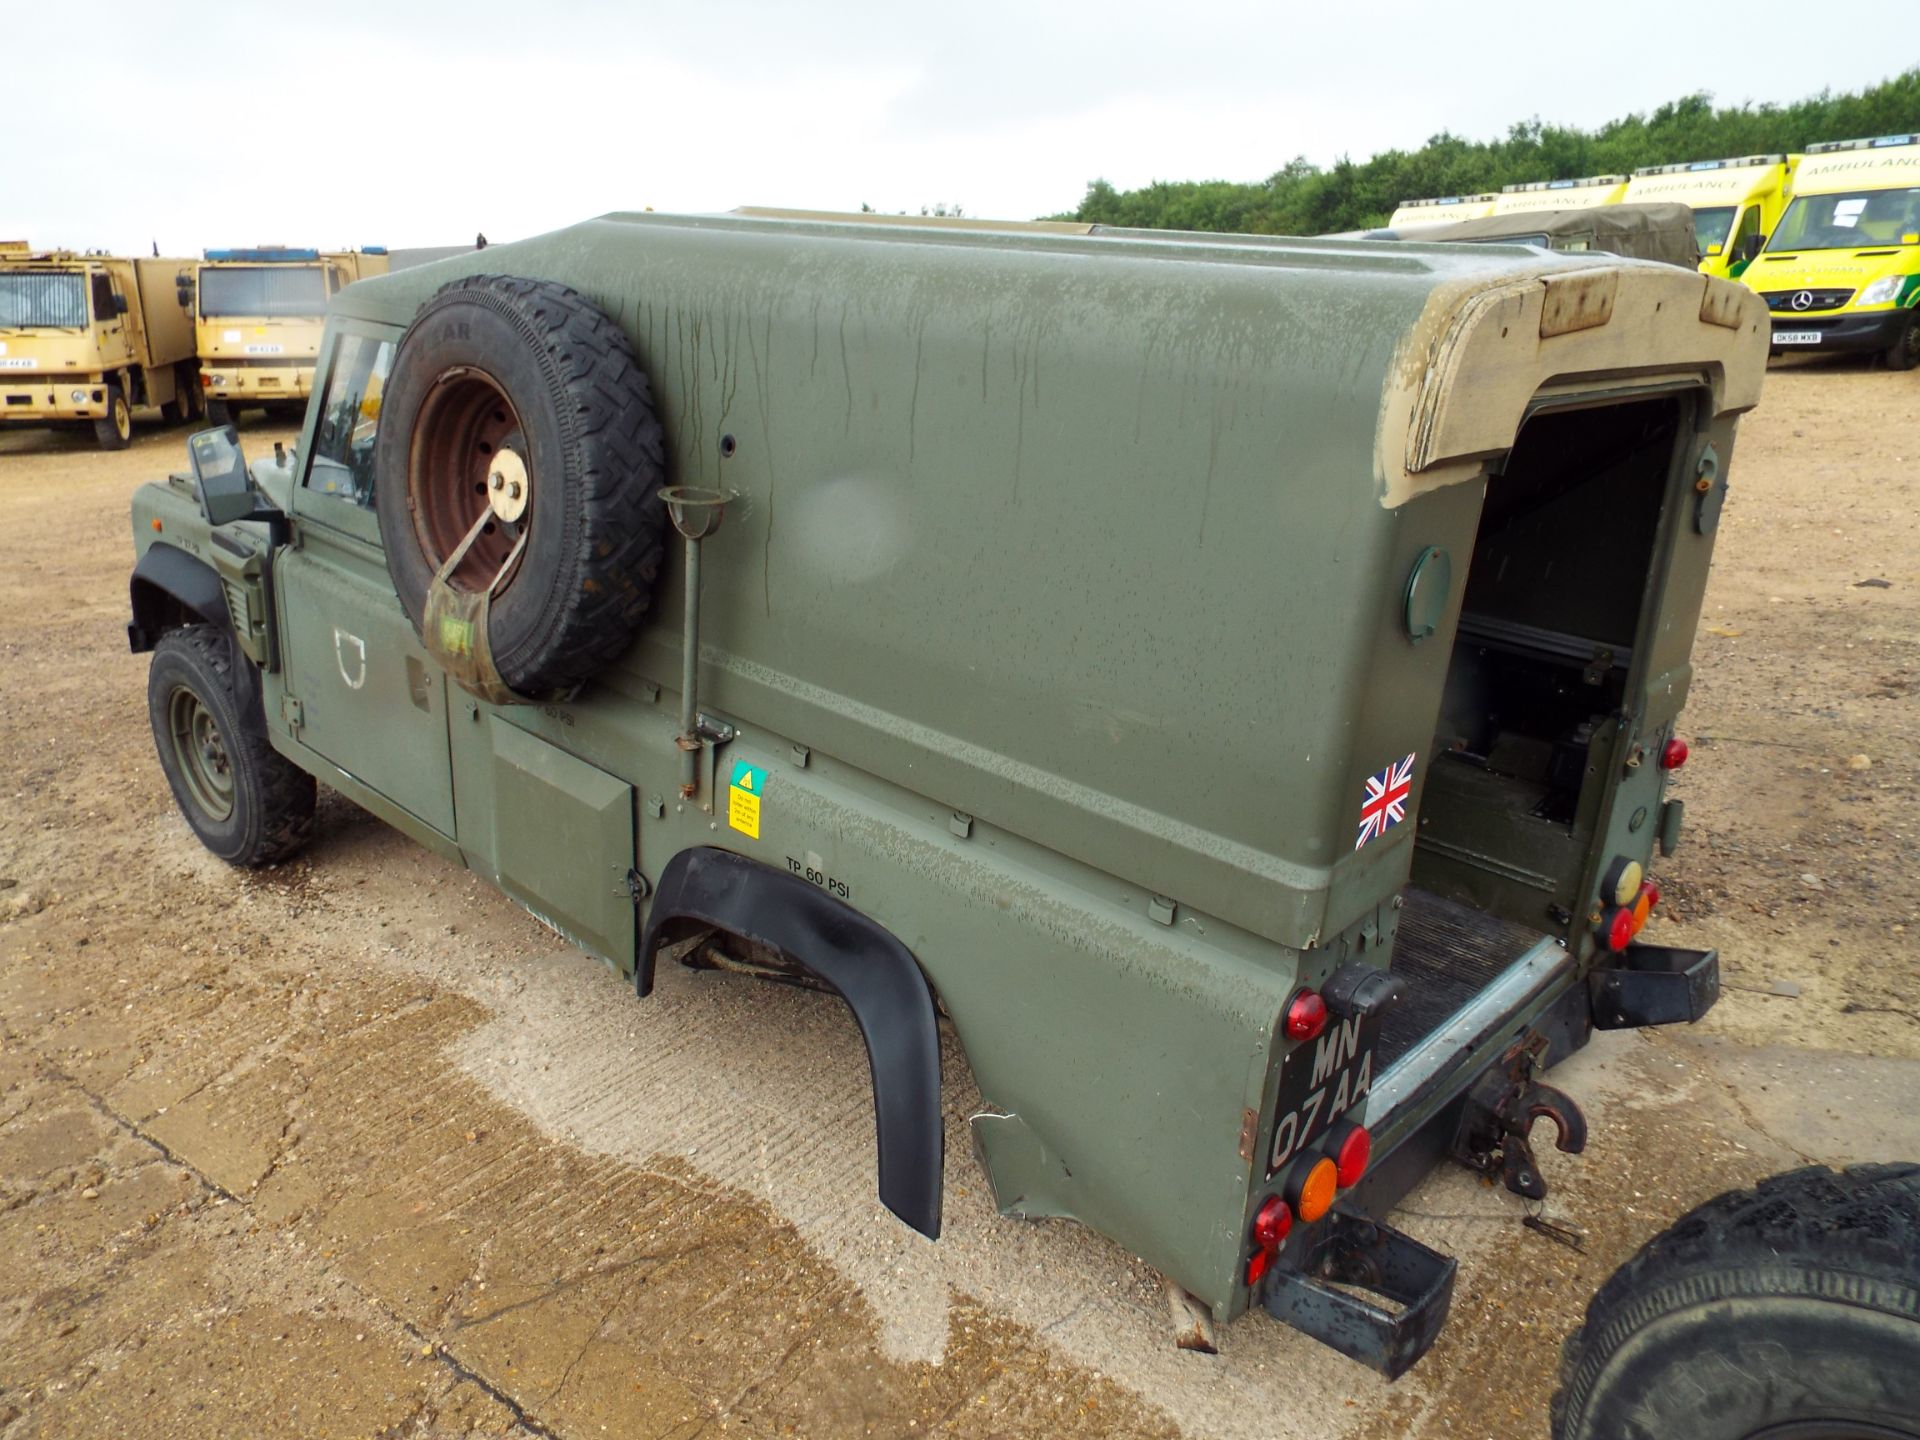 Military Specification Land Rover Wolf 110 Hard Top - Image 3 of 25